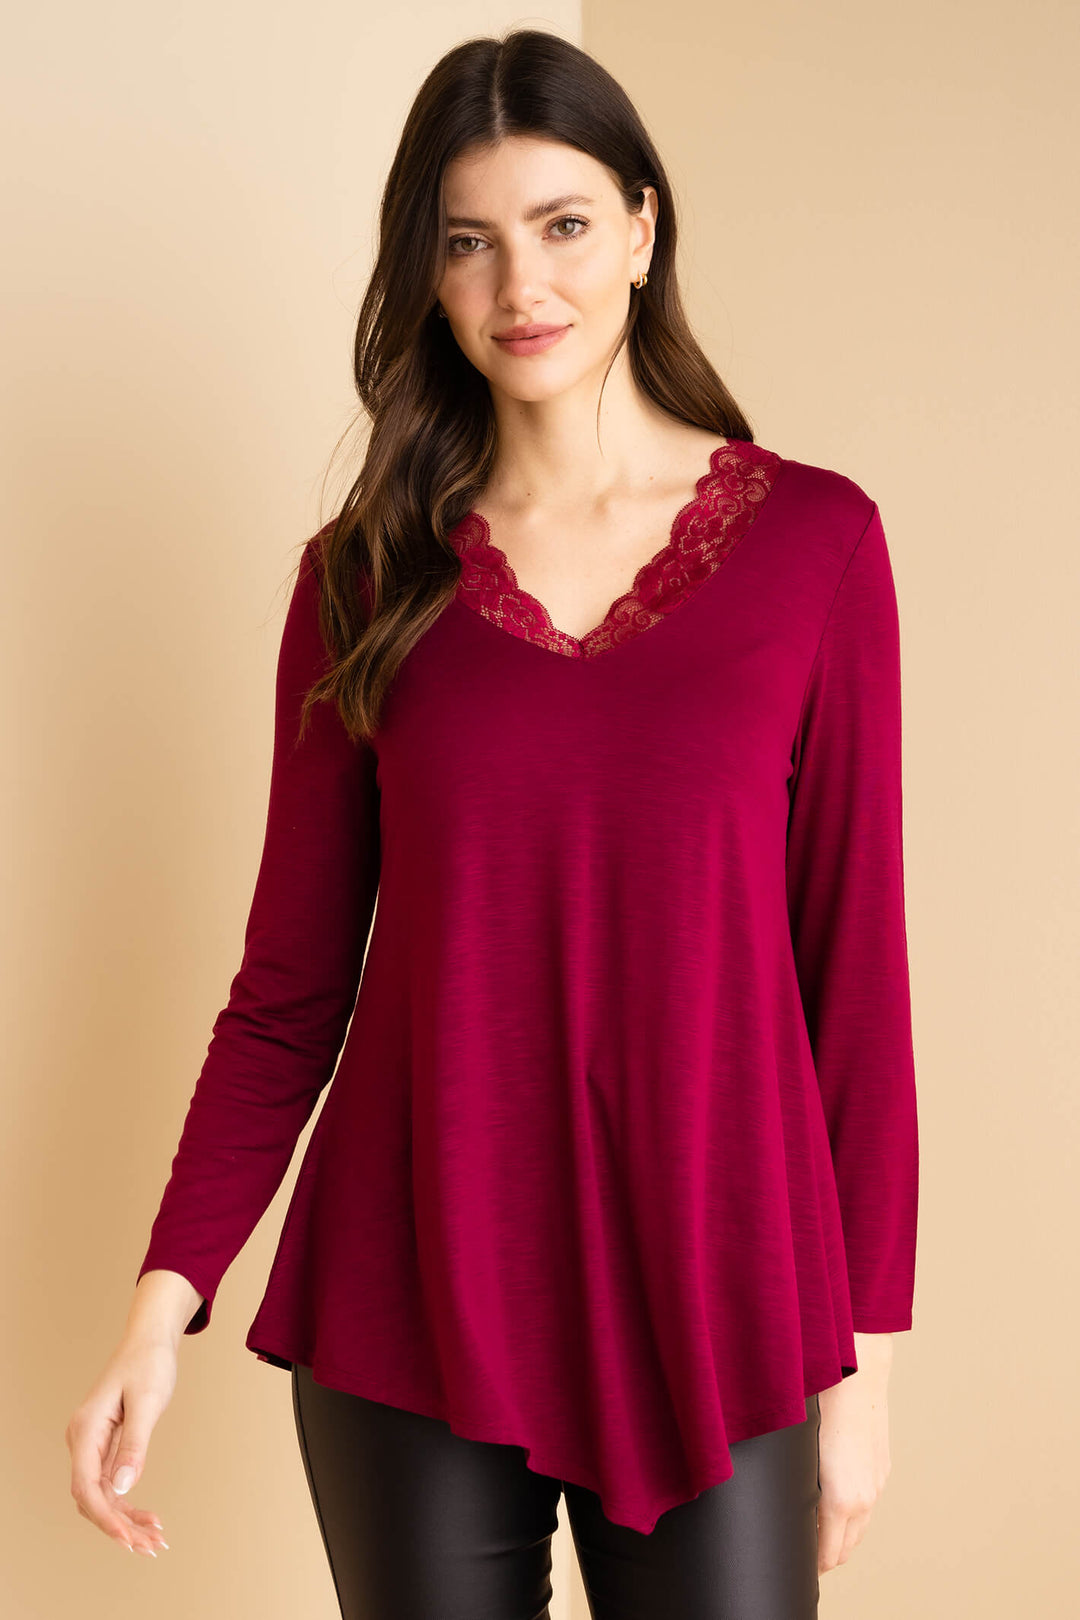 Marble Fashion 7091 205 Burgundy Red Lace Neck Tunic Top - Experience Boutique